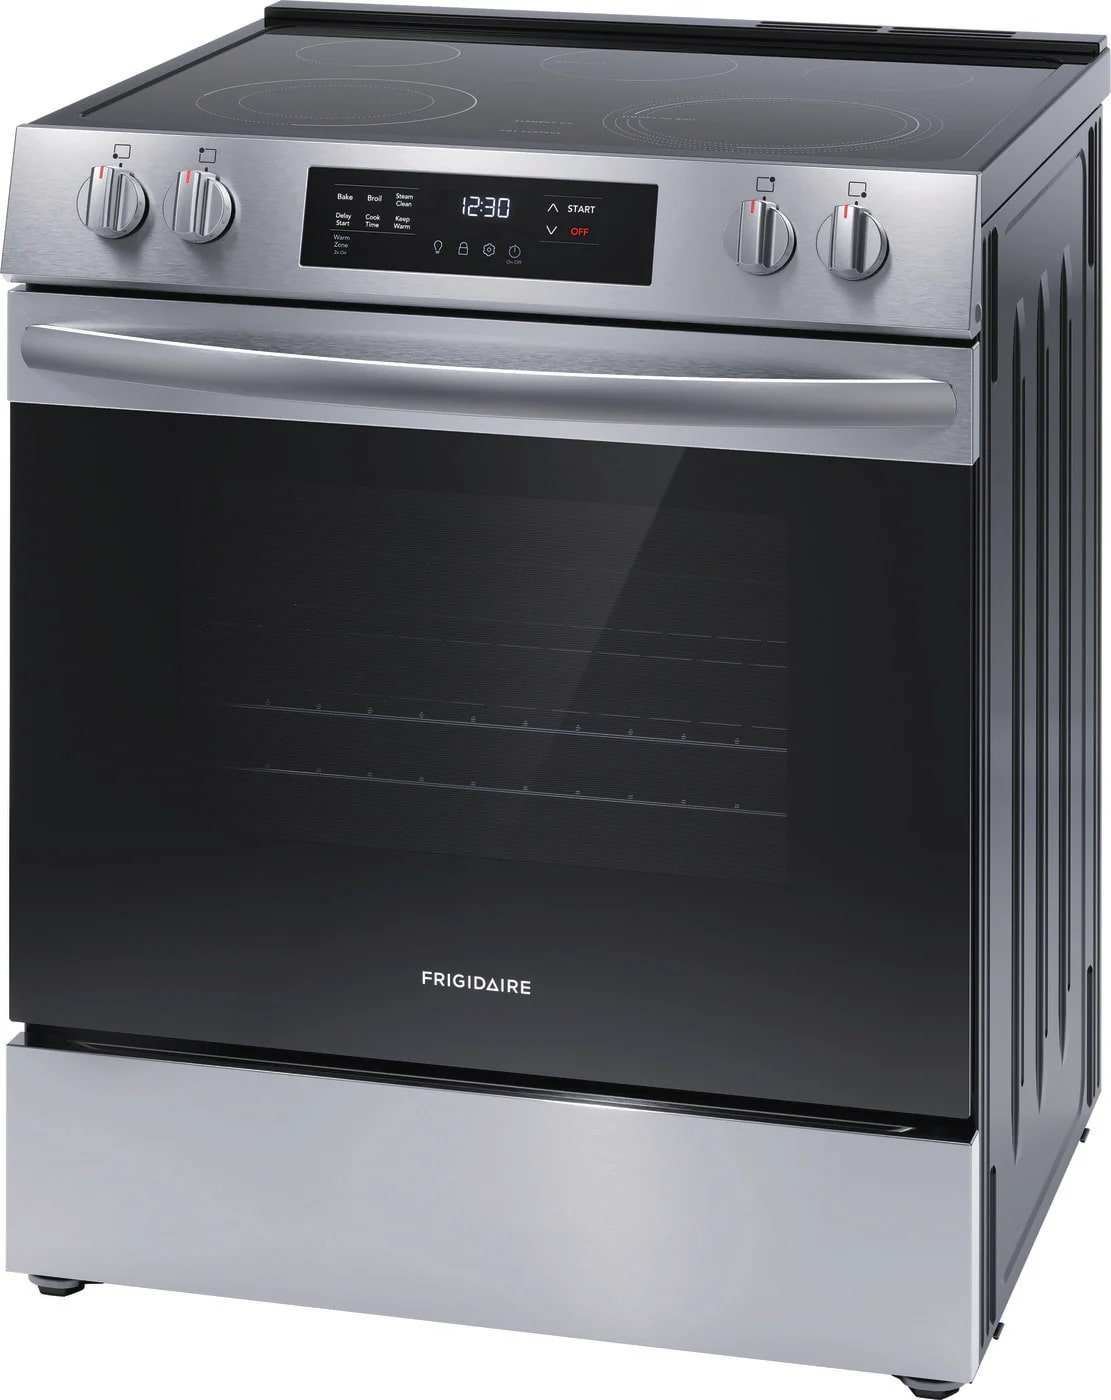 Frigidaire - 5.3 cu. ft  Electric Range in Stainless - FCFE306CAS